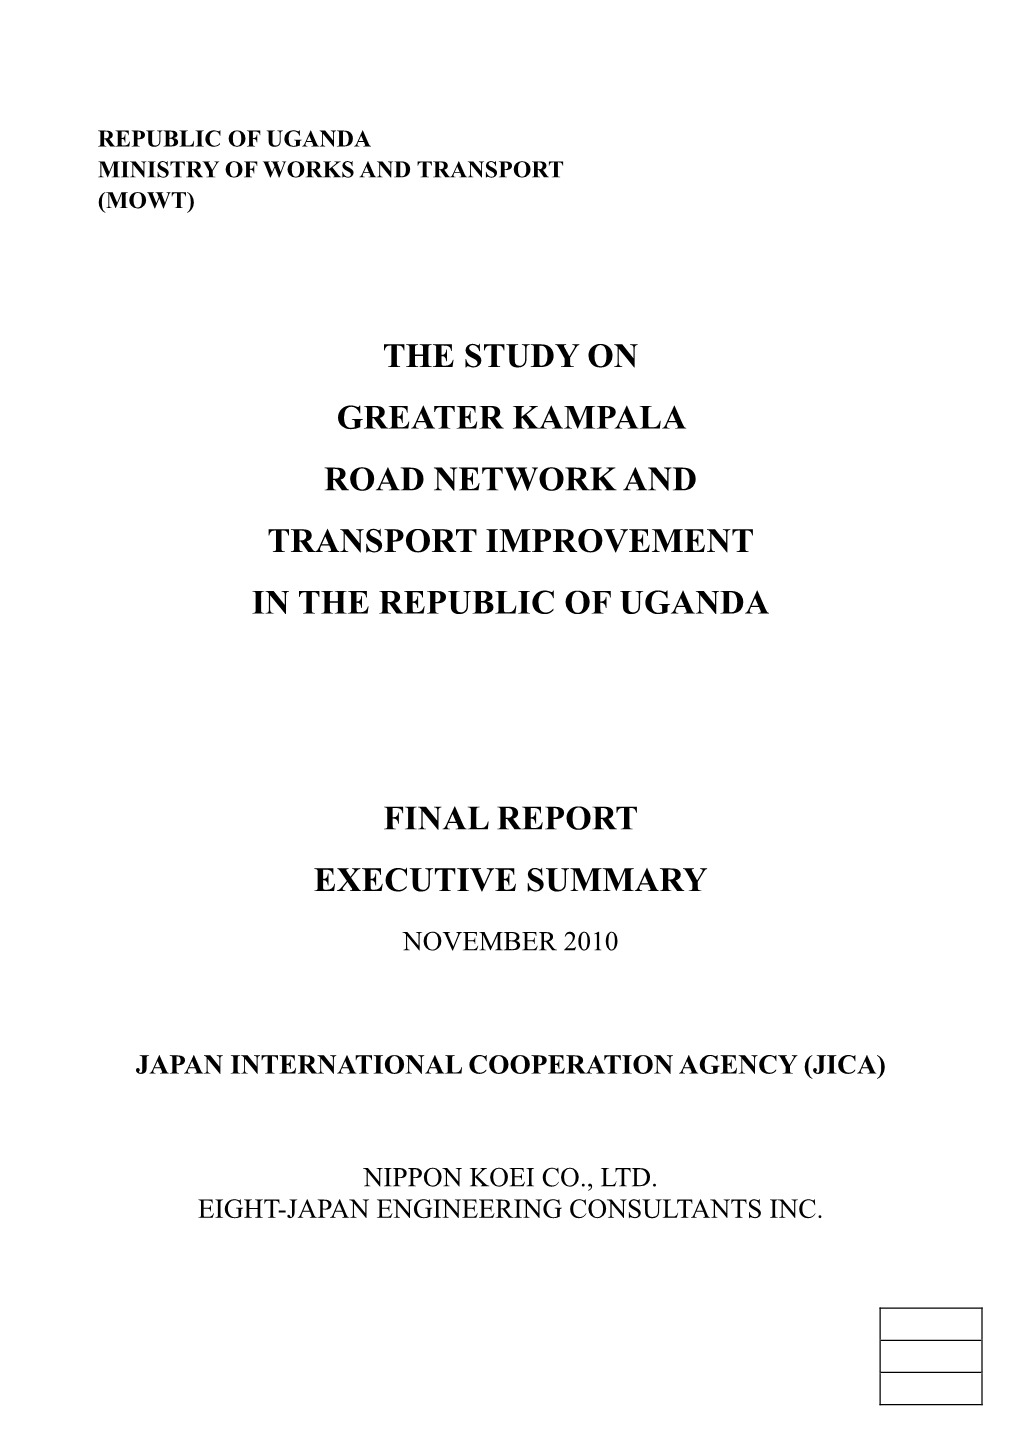 The Study on Greater Kampala Road Network and Transport Improvement in the Republic of Uganda